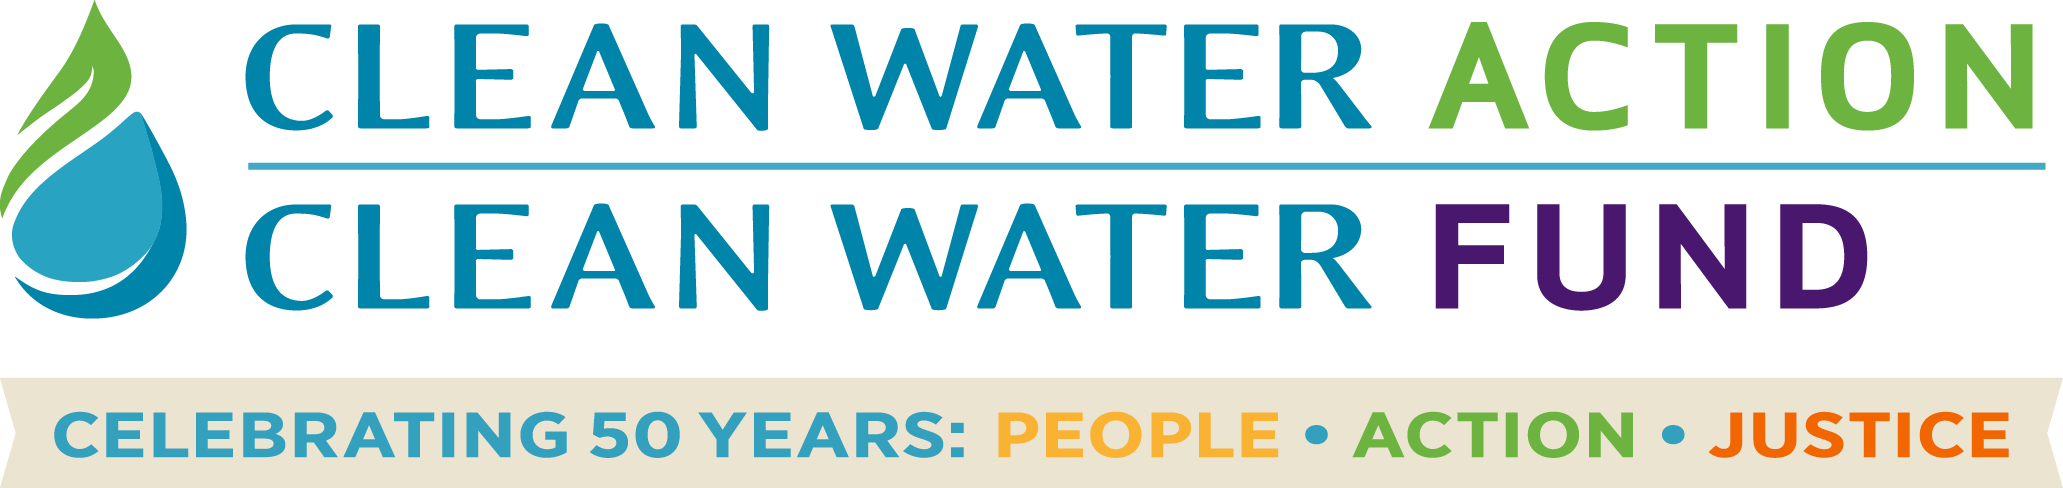 Clean Water Action and Clean Water Fund: Celebrating 50 Years People - Action - Justice